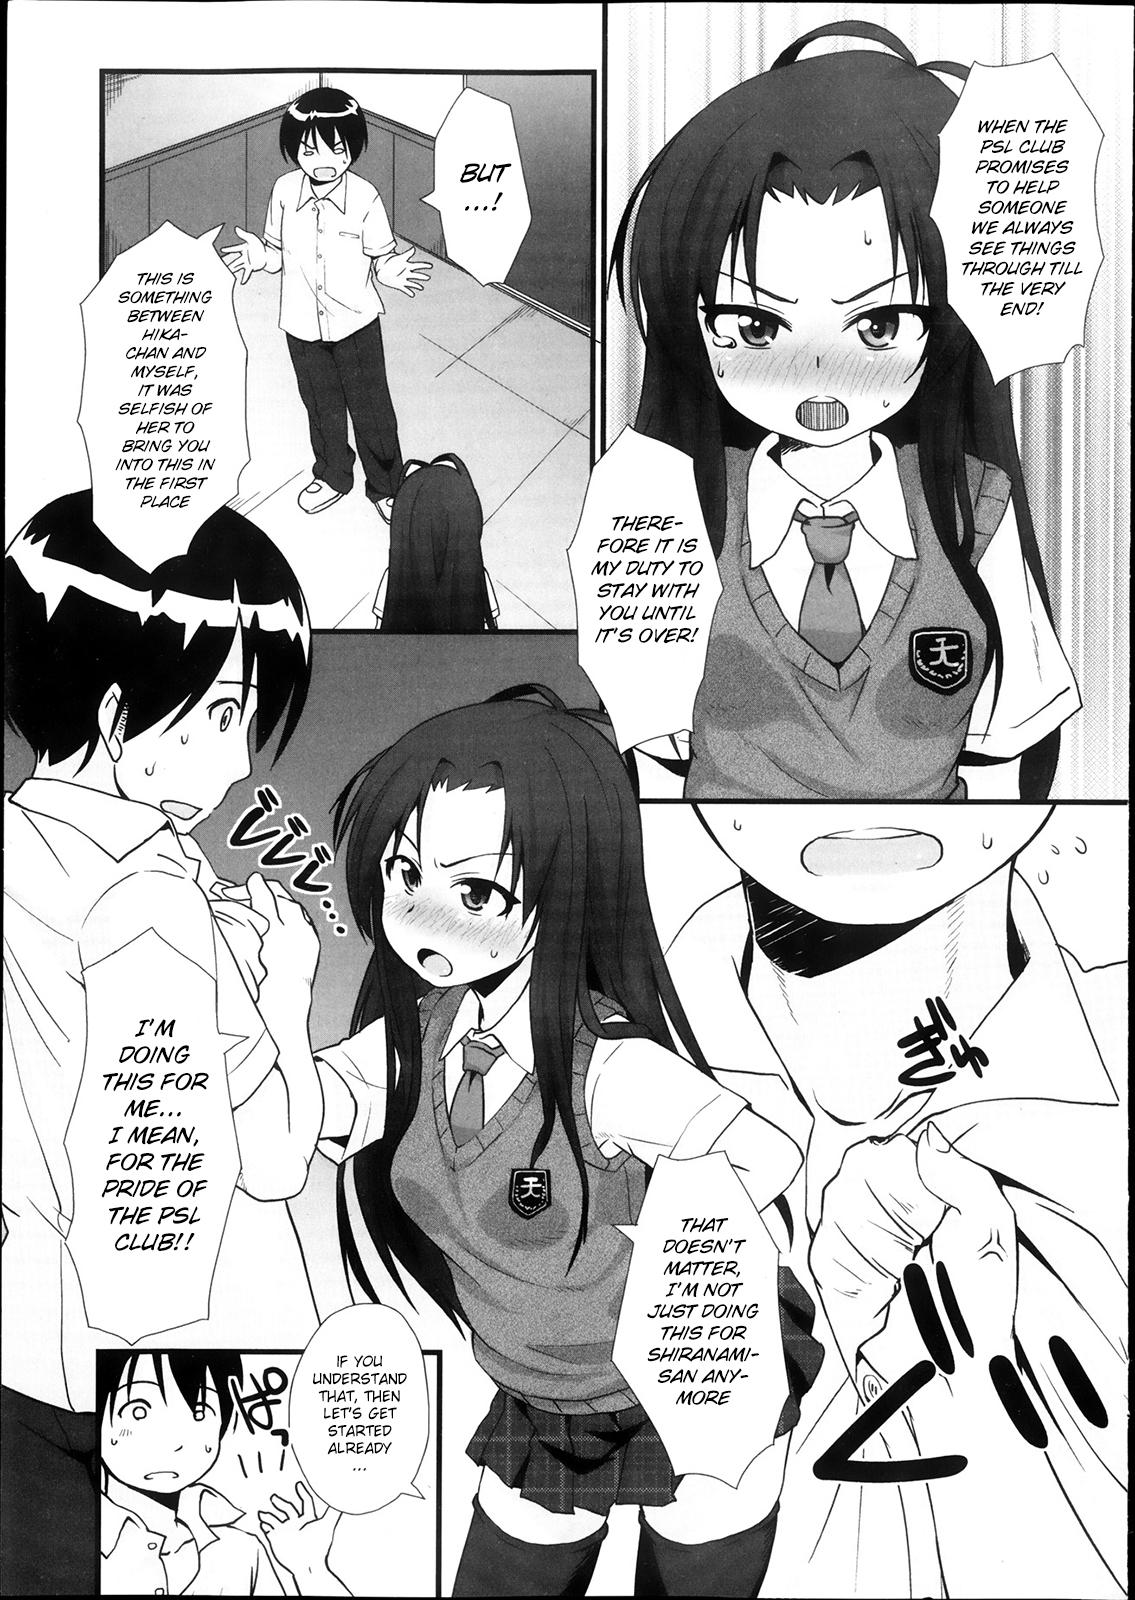 Maid PSL-bu e Youkoso | Welcome to the PSL Club Prostitute - Page 7